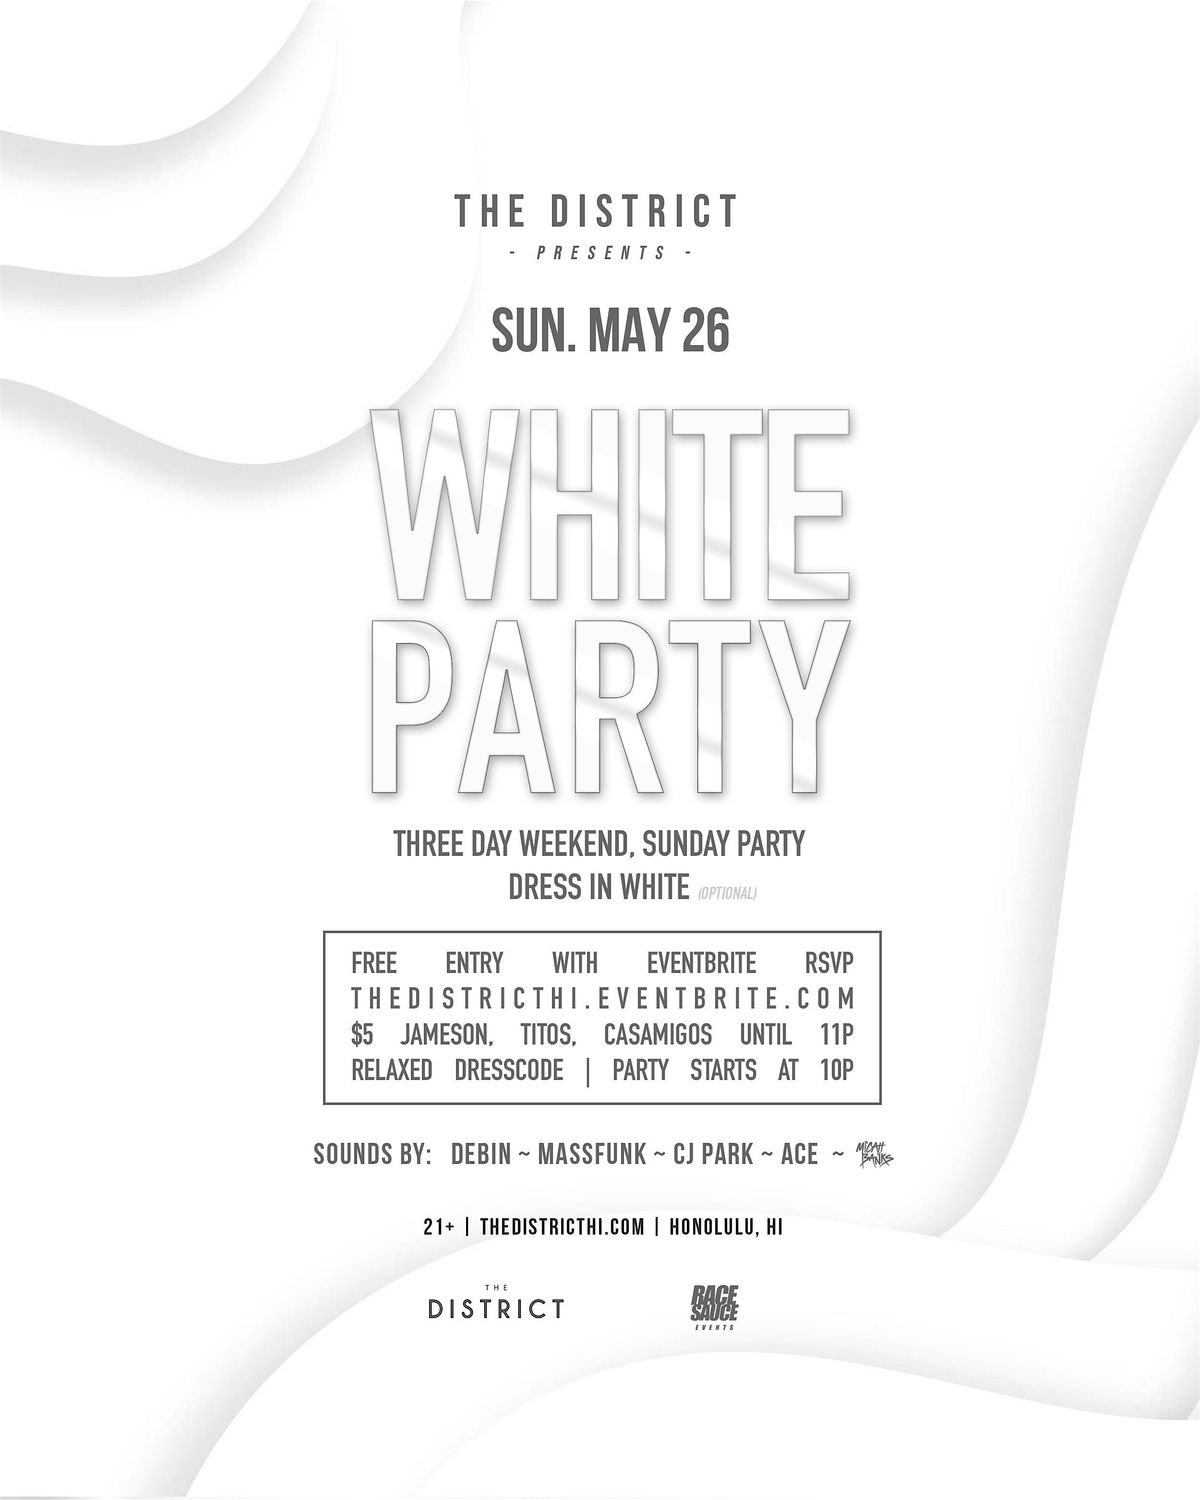 The White Party - Sunday